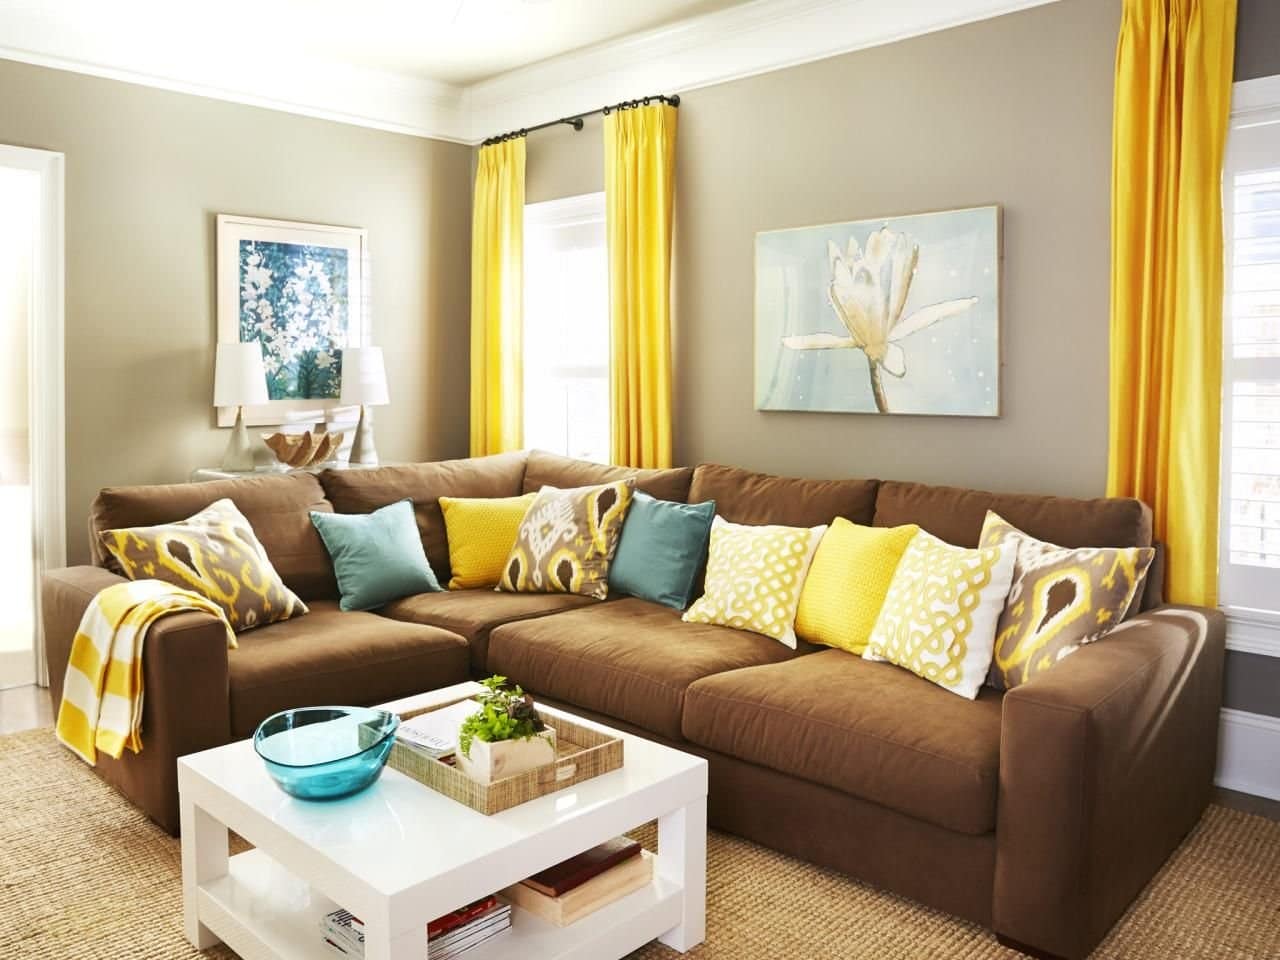 Brown sofa in the neutral gray living room with yellow curtains